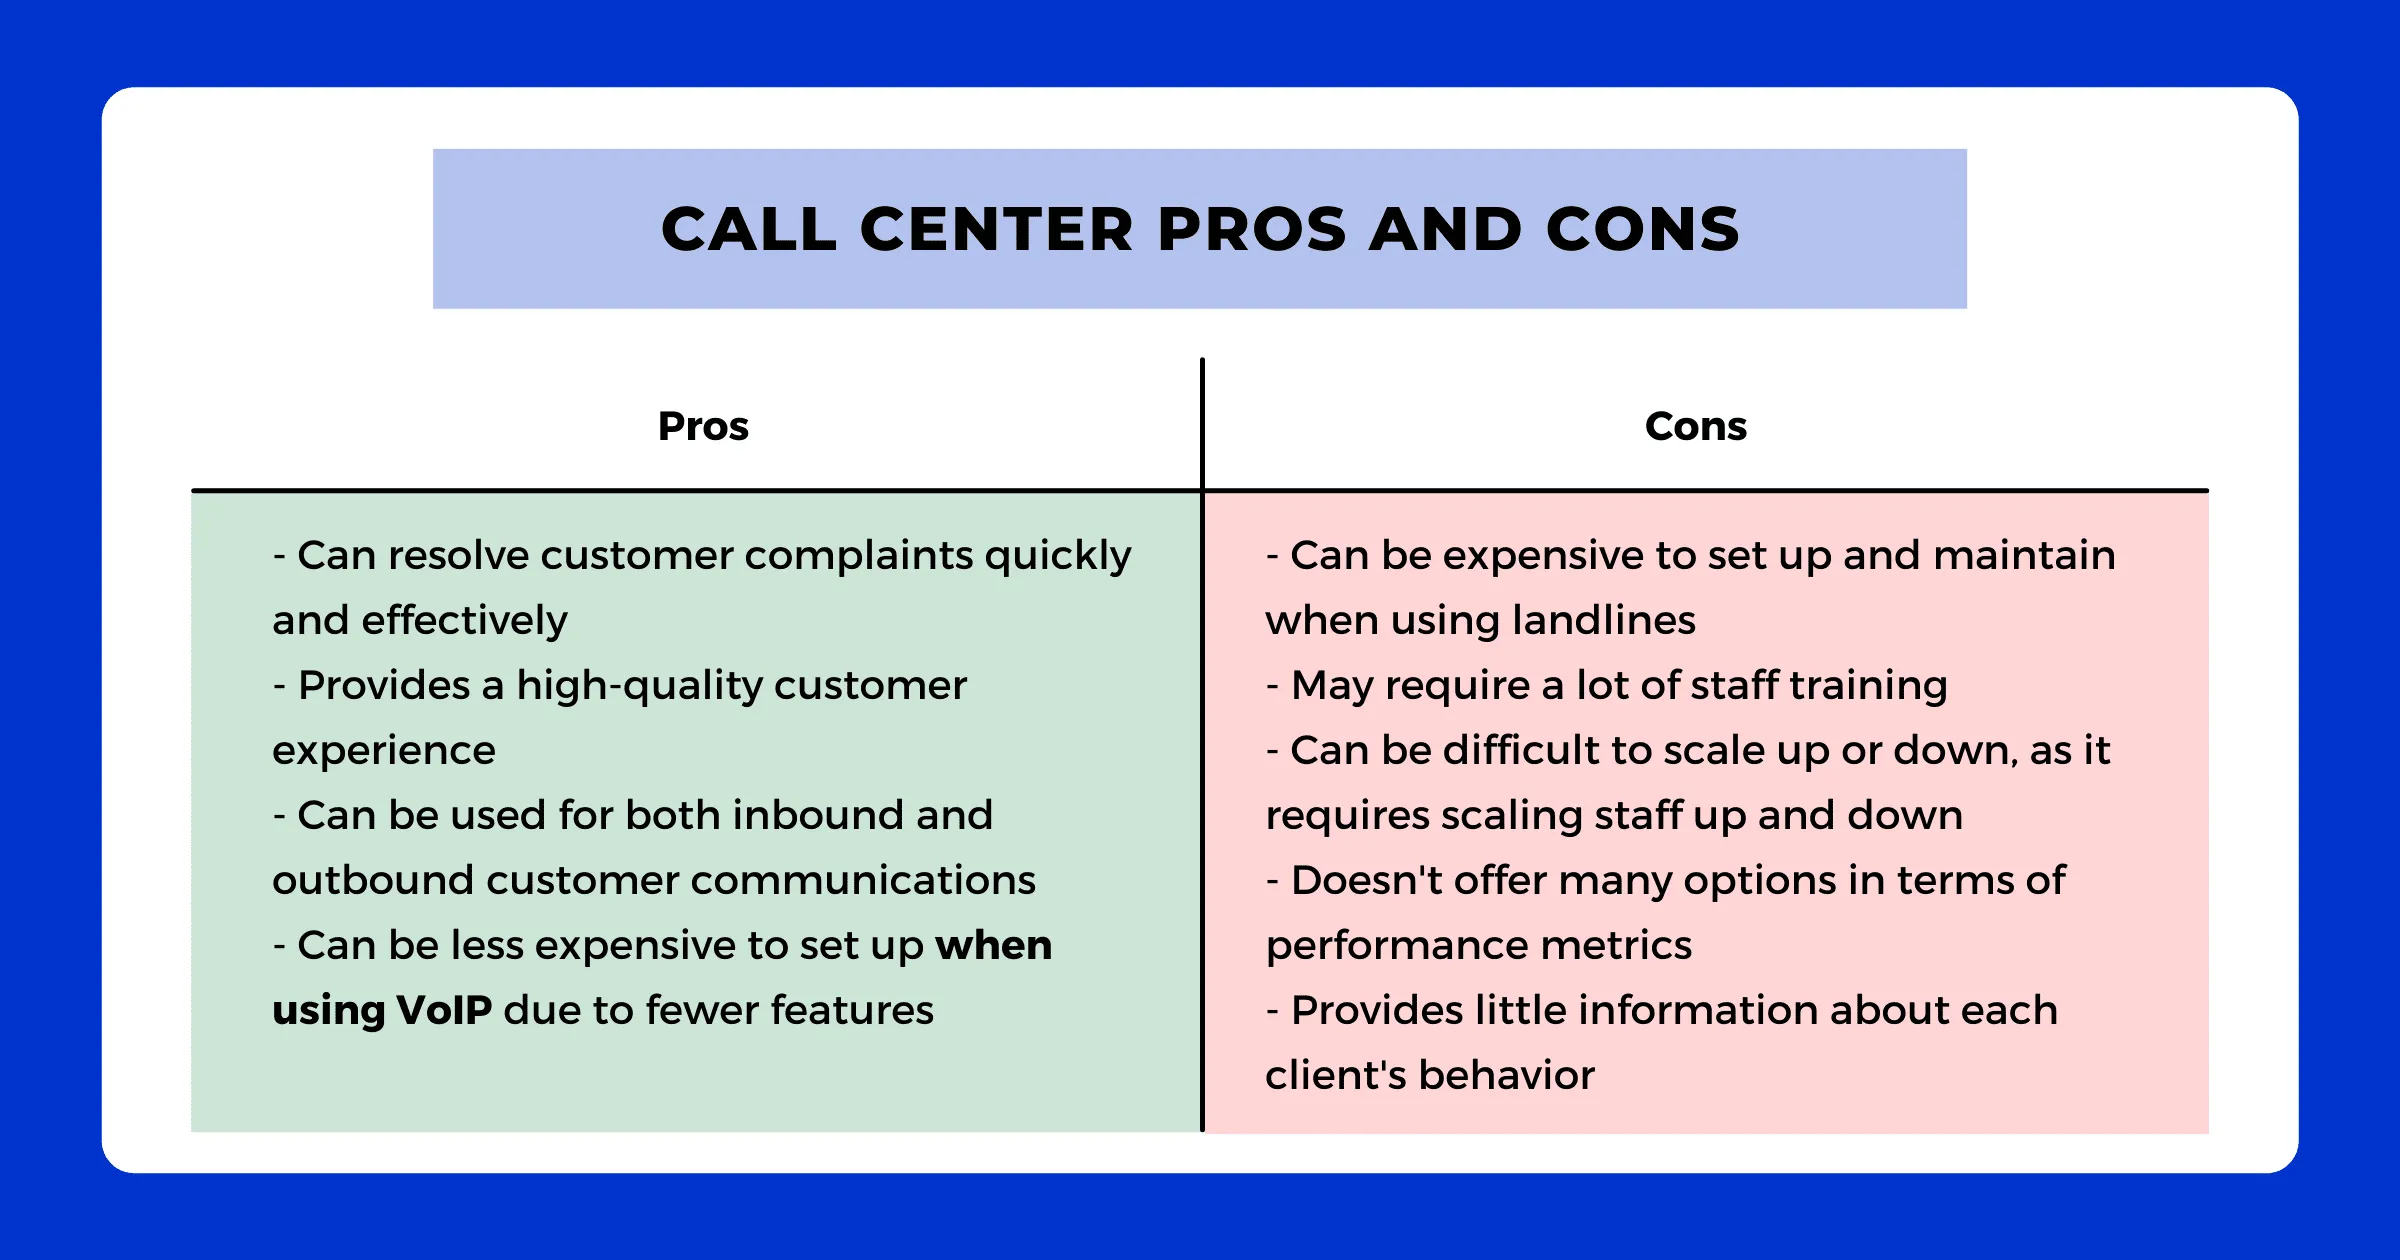 The pros and cons of a call center